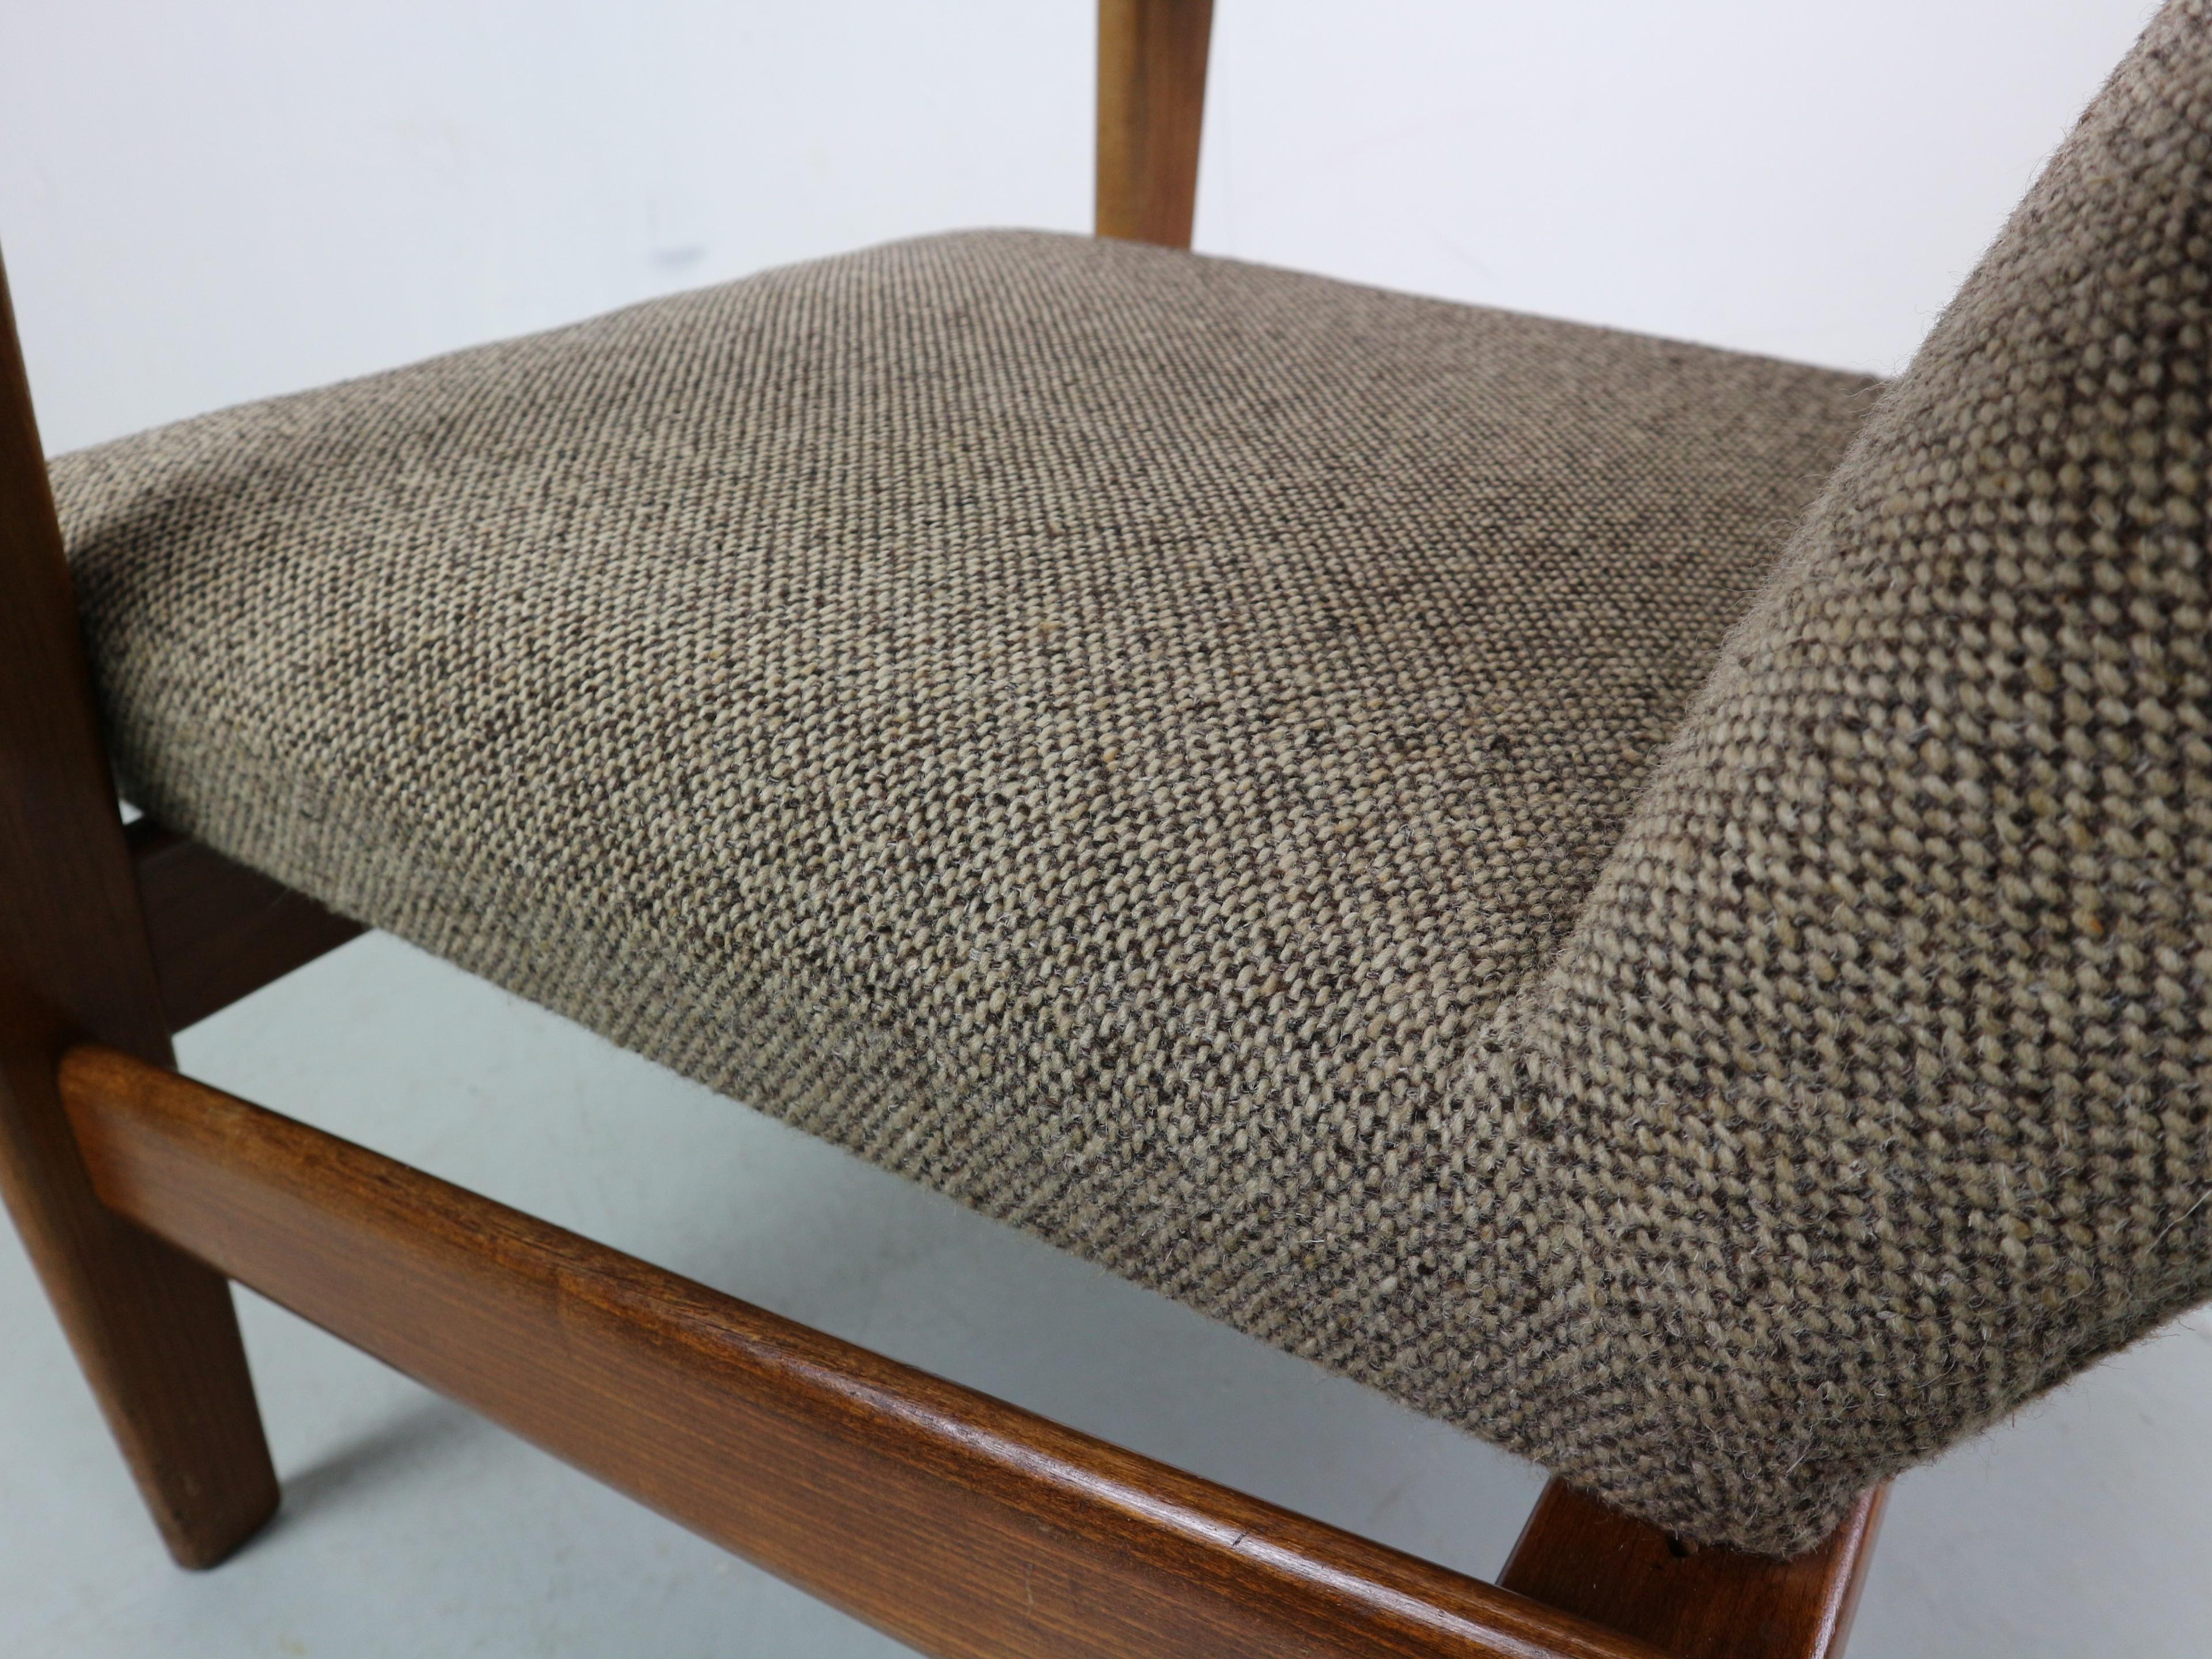 Lounge Chair by Arne Wahl Iversen for Komfort, 1960s For Sale 11